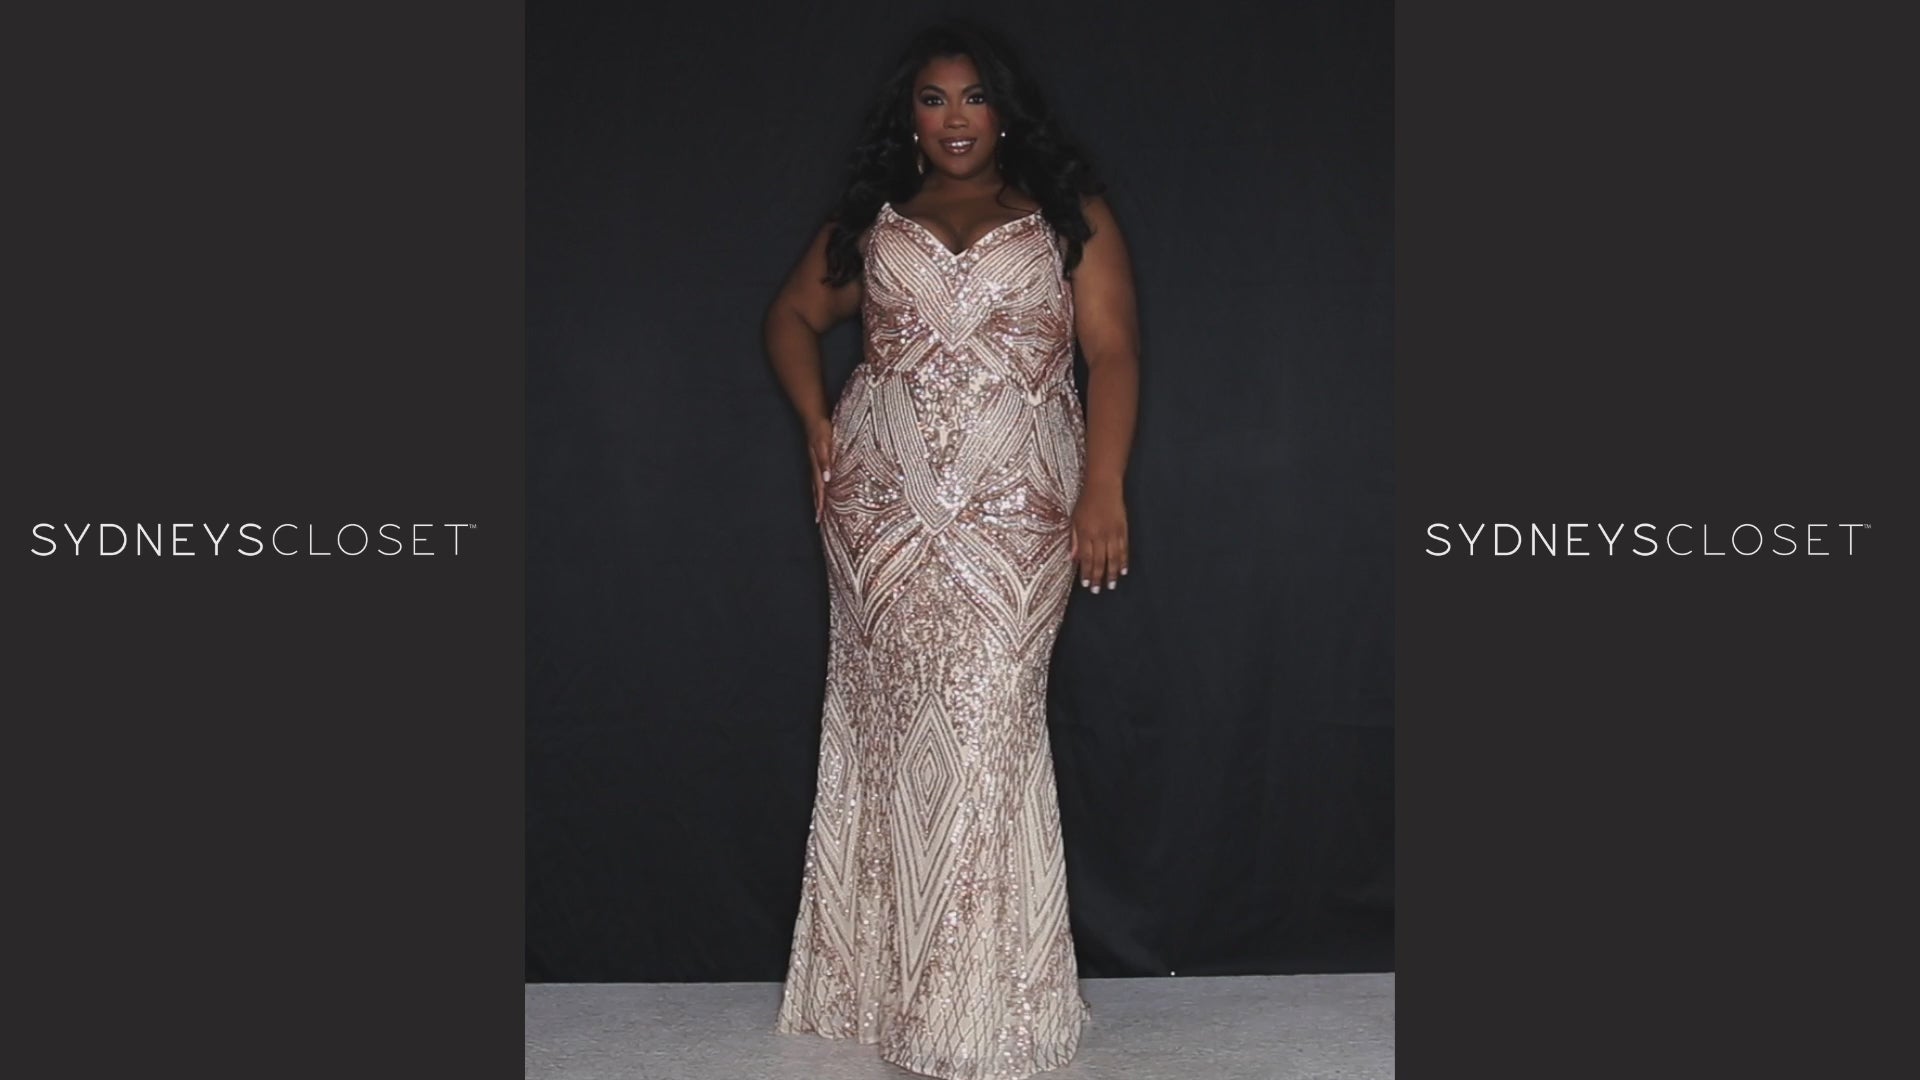 Sydney's Closet SC7340 Rose Gold Fitted Evening Gown Sequins V Neckline Plus Size Prom Dress. Look dazzling like a diva in Sydney's Closet SC7340 Rose Gold Fitted Evening Gown. Its sequined V-neckline, fitted silhouette, and plus size design will make you shine like a star at your prom! All eyes will be on you. Oooh la la!